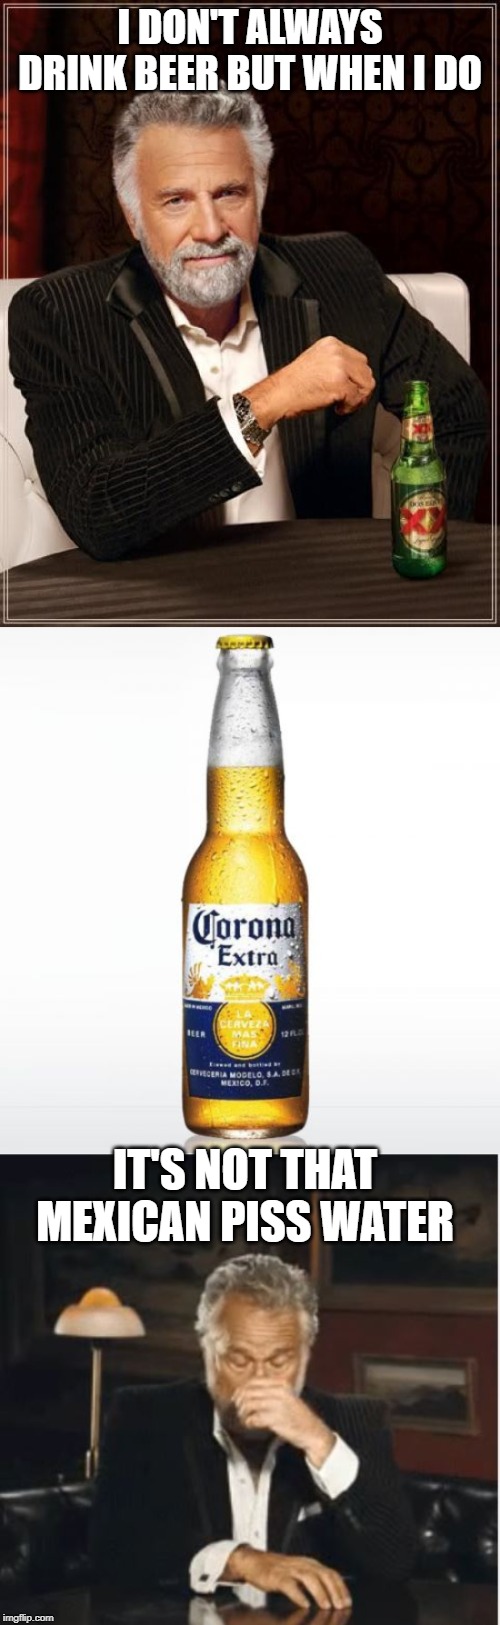 No Bueno! | I DON'T ALWAYS DRINK BEER BUT WHEN I DO; IT'S NOT THAT MEXICAN PISS WATER | image tagged in memes,the most interesting man in the world,corona | made w/ Imgflip meme maker